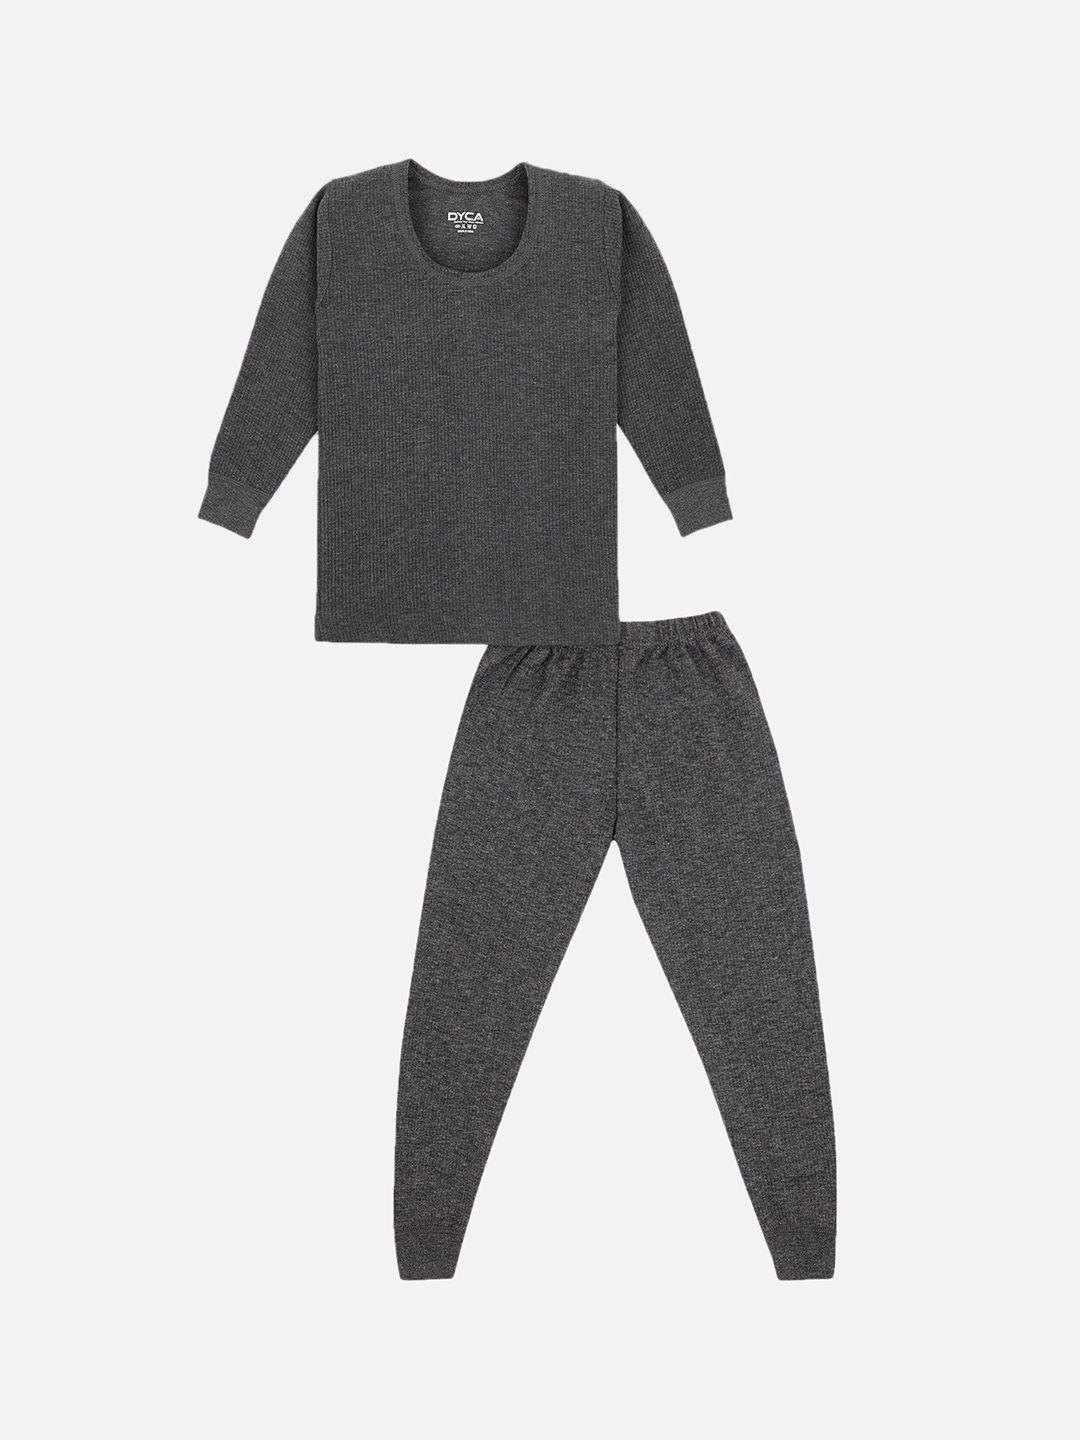 dyca kids charcoal grey solid thermal set